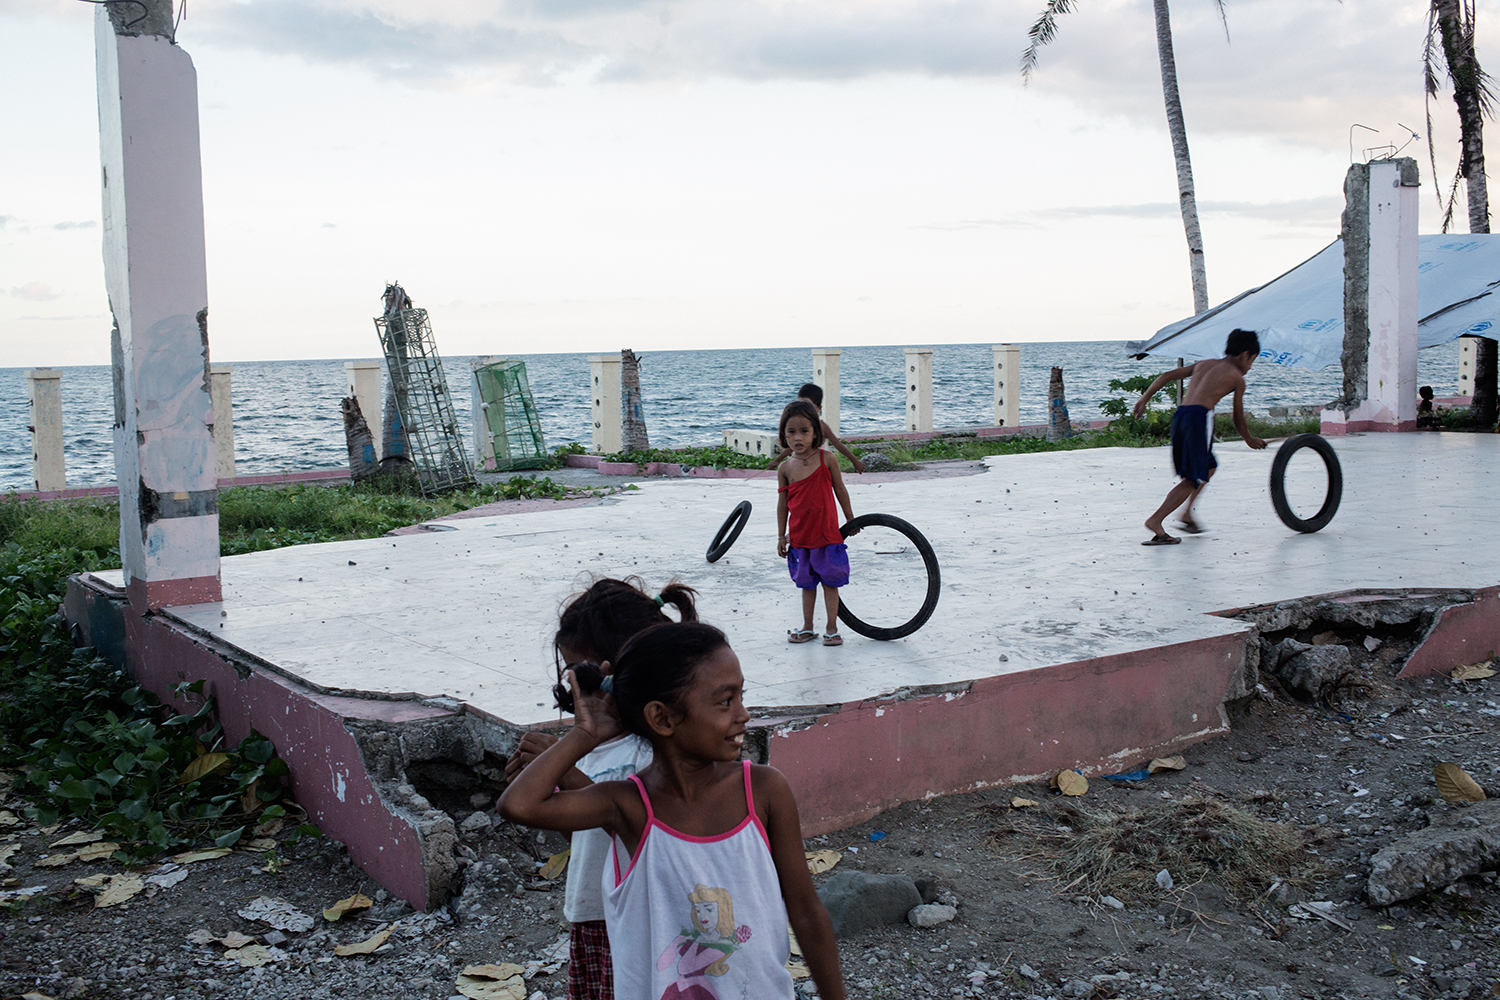  Children play in the ruins of a building in the tent village near San Jose airport, Tacloban City, Leyte in the Philippines on November 8, 2014 one year after the destruction of the landfall of Typhoon Haiyan. 